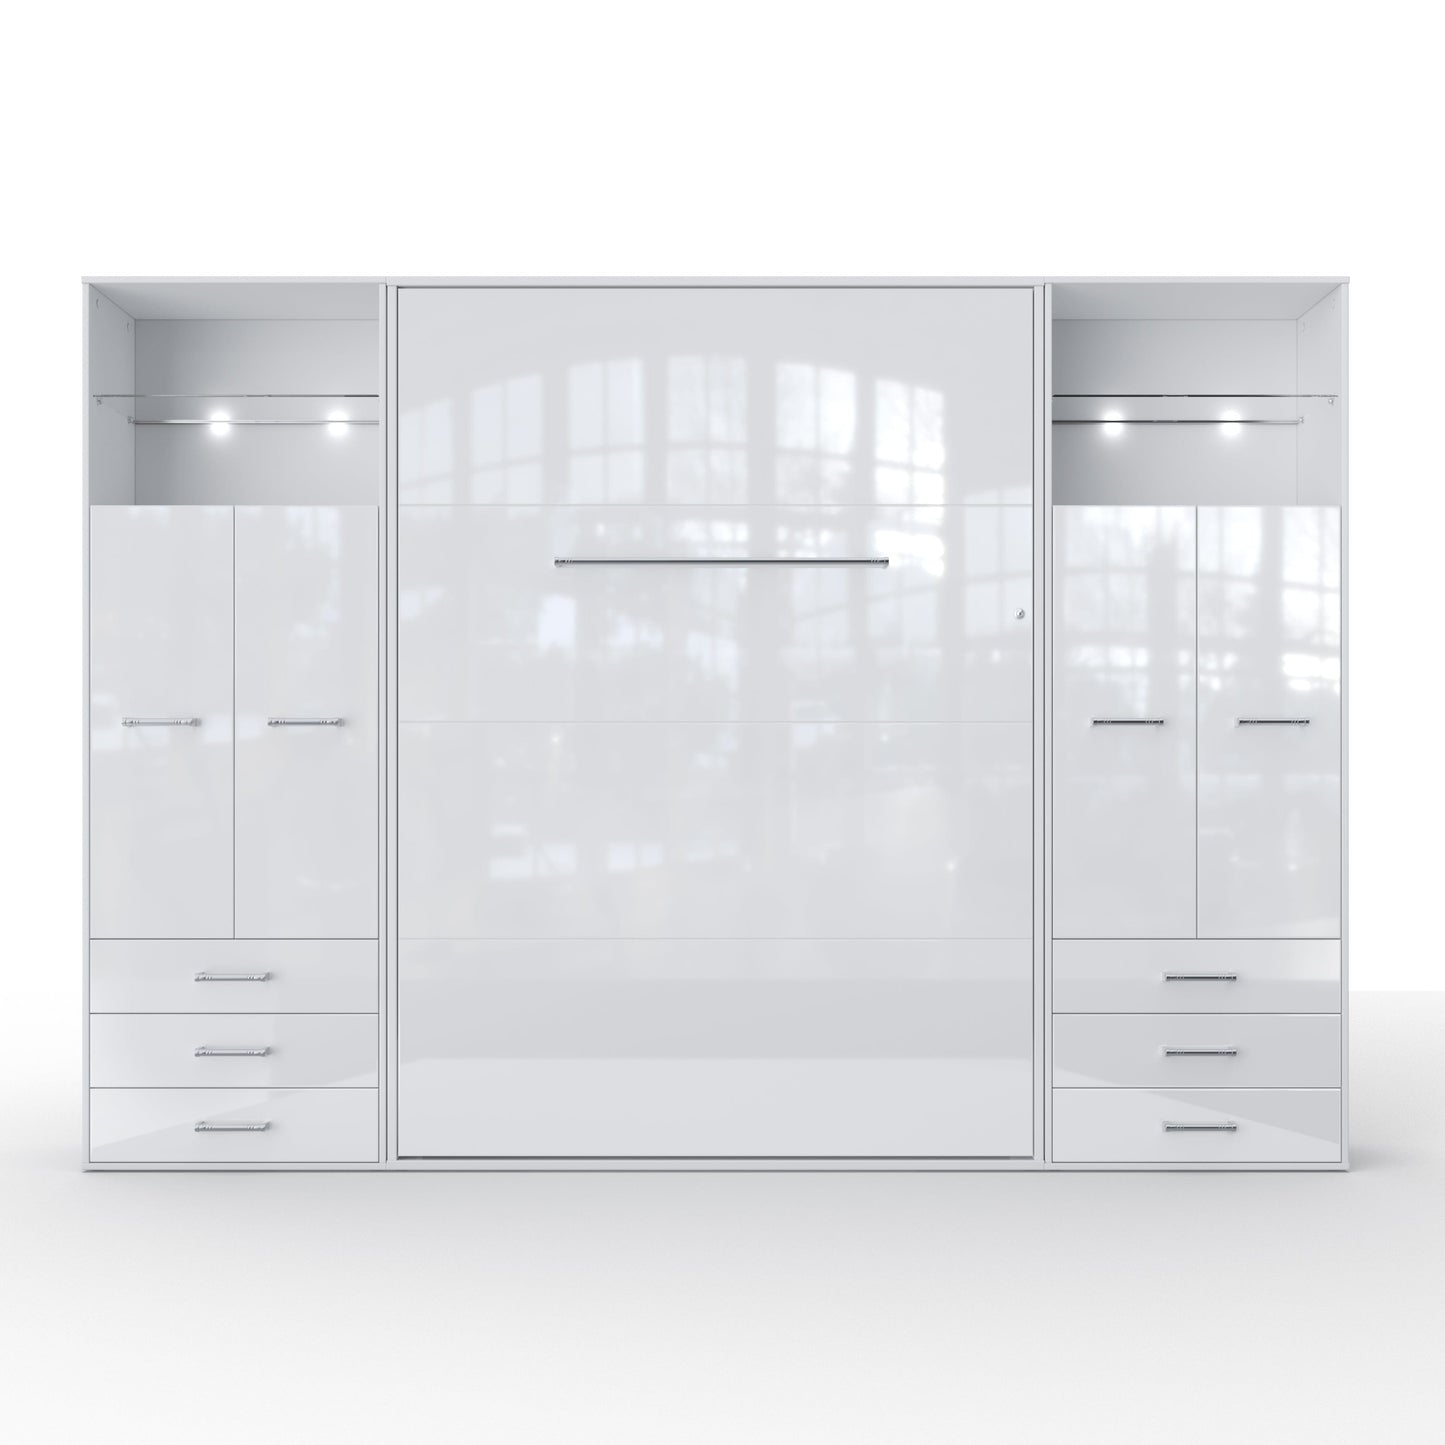 Maxima House Vertical Murphy Bed Invento. European Queen + 2 cabinets White/White IN160V-10W